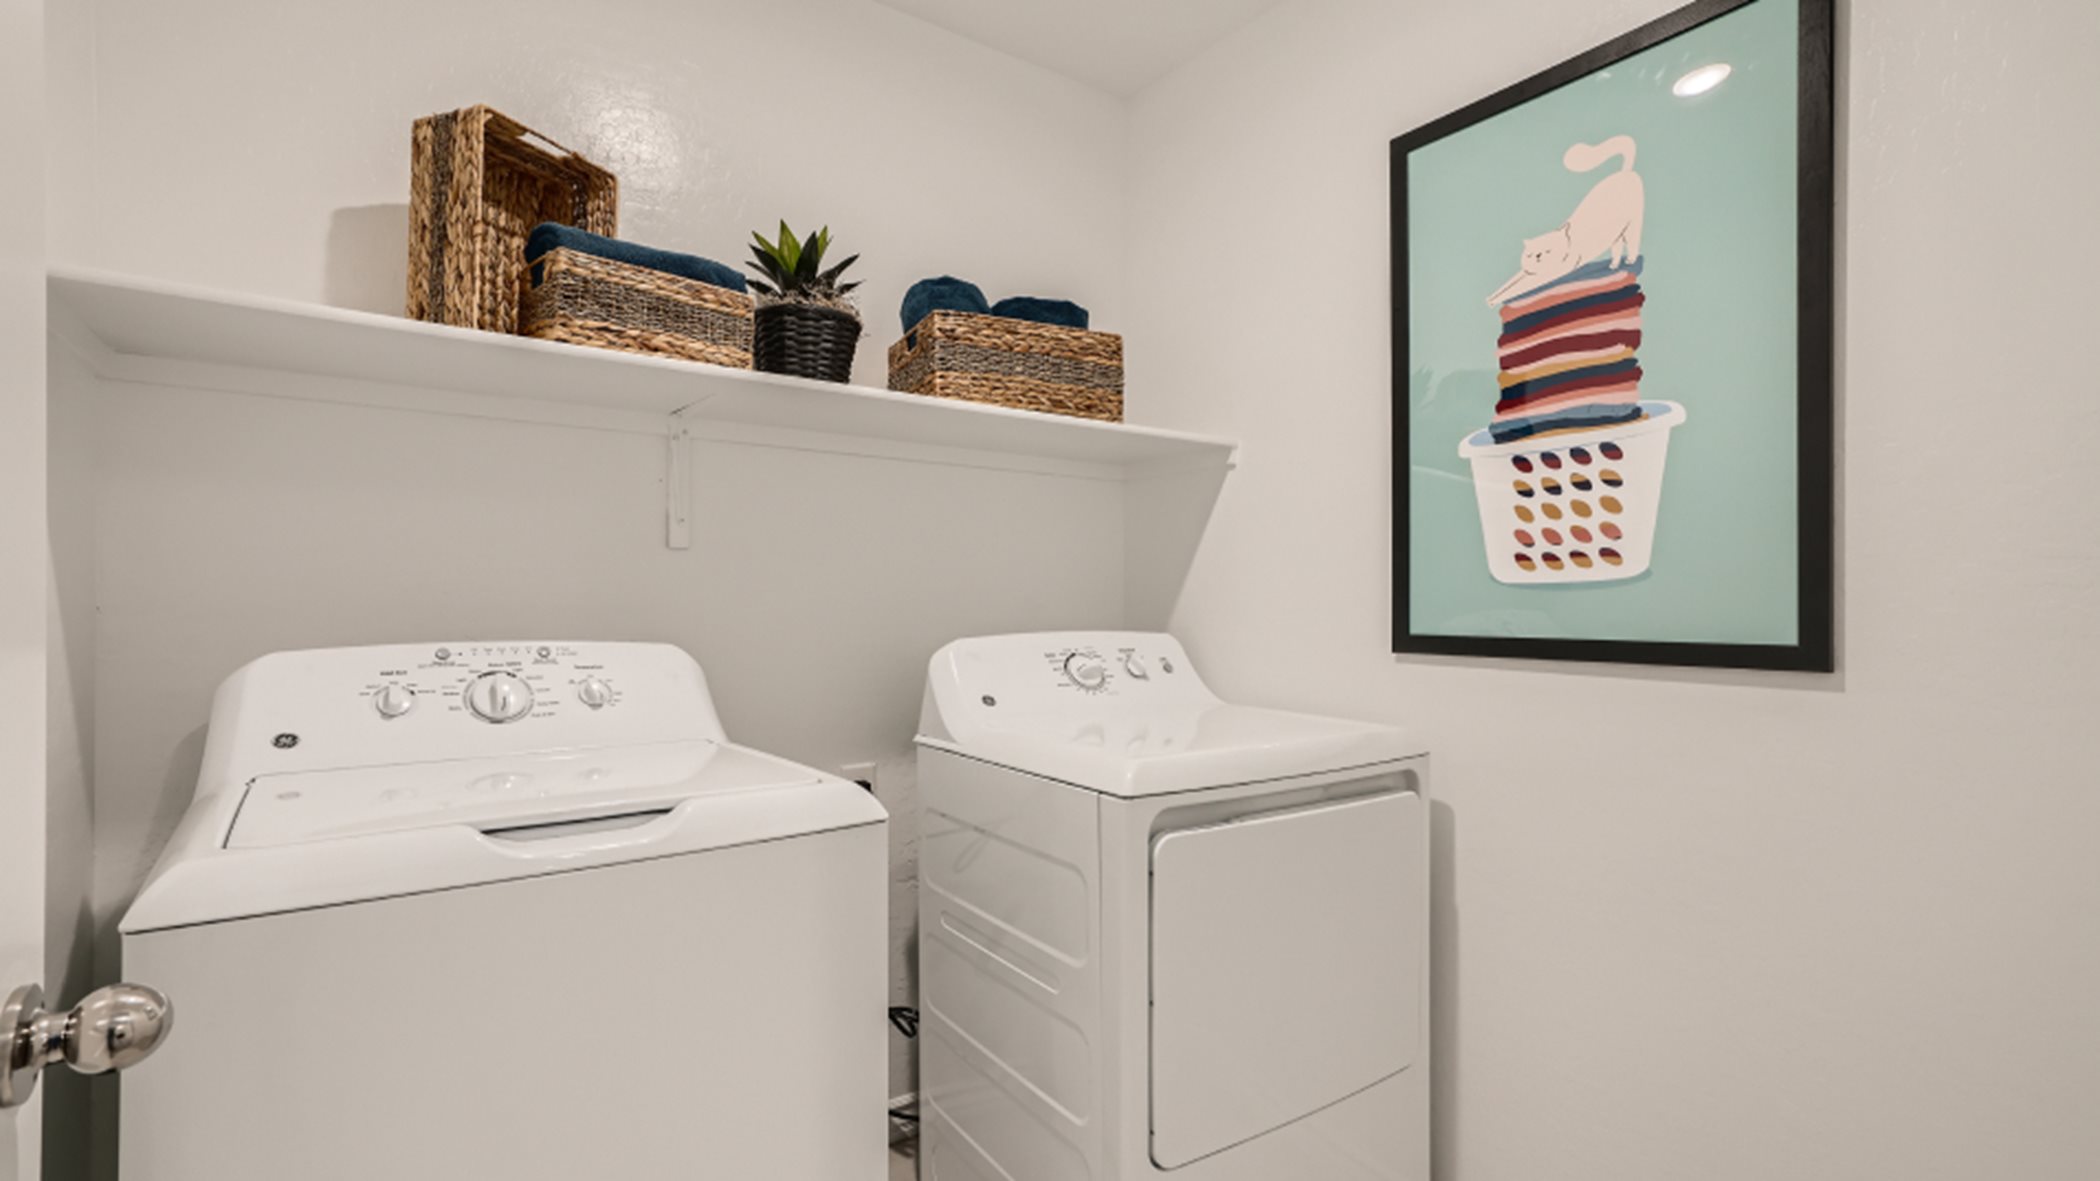 Beck Laundry Room